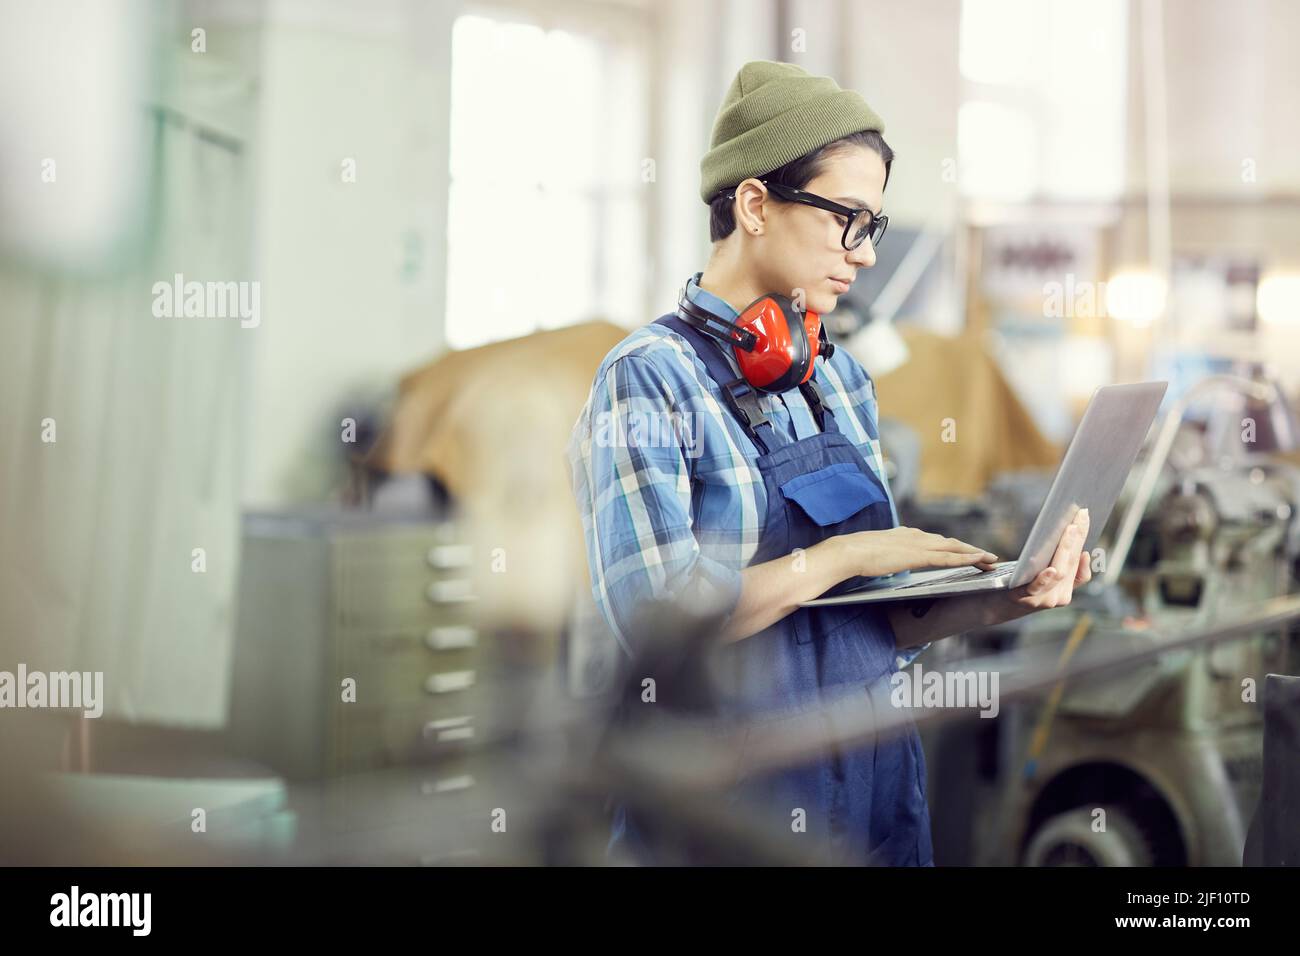 Serious busy young female engineer in hipster hat standing in factory shop and identifying industrial machine errors using laptop Stock Photo